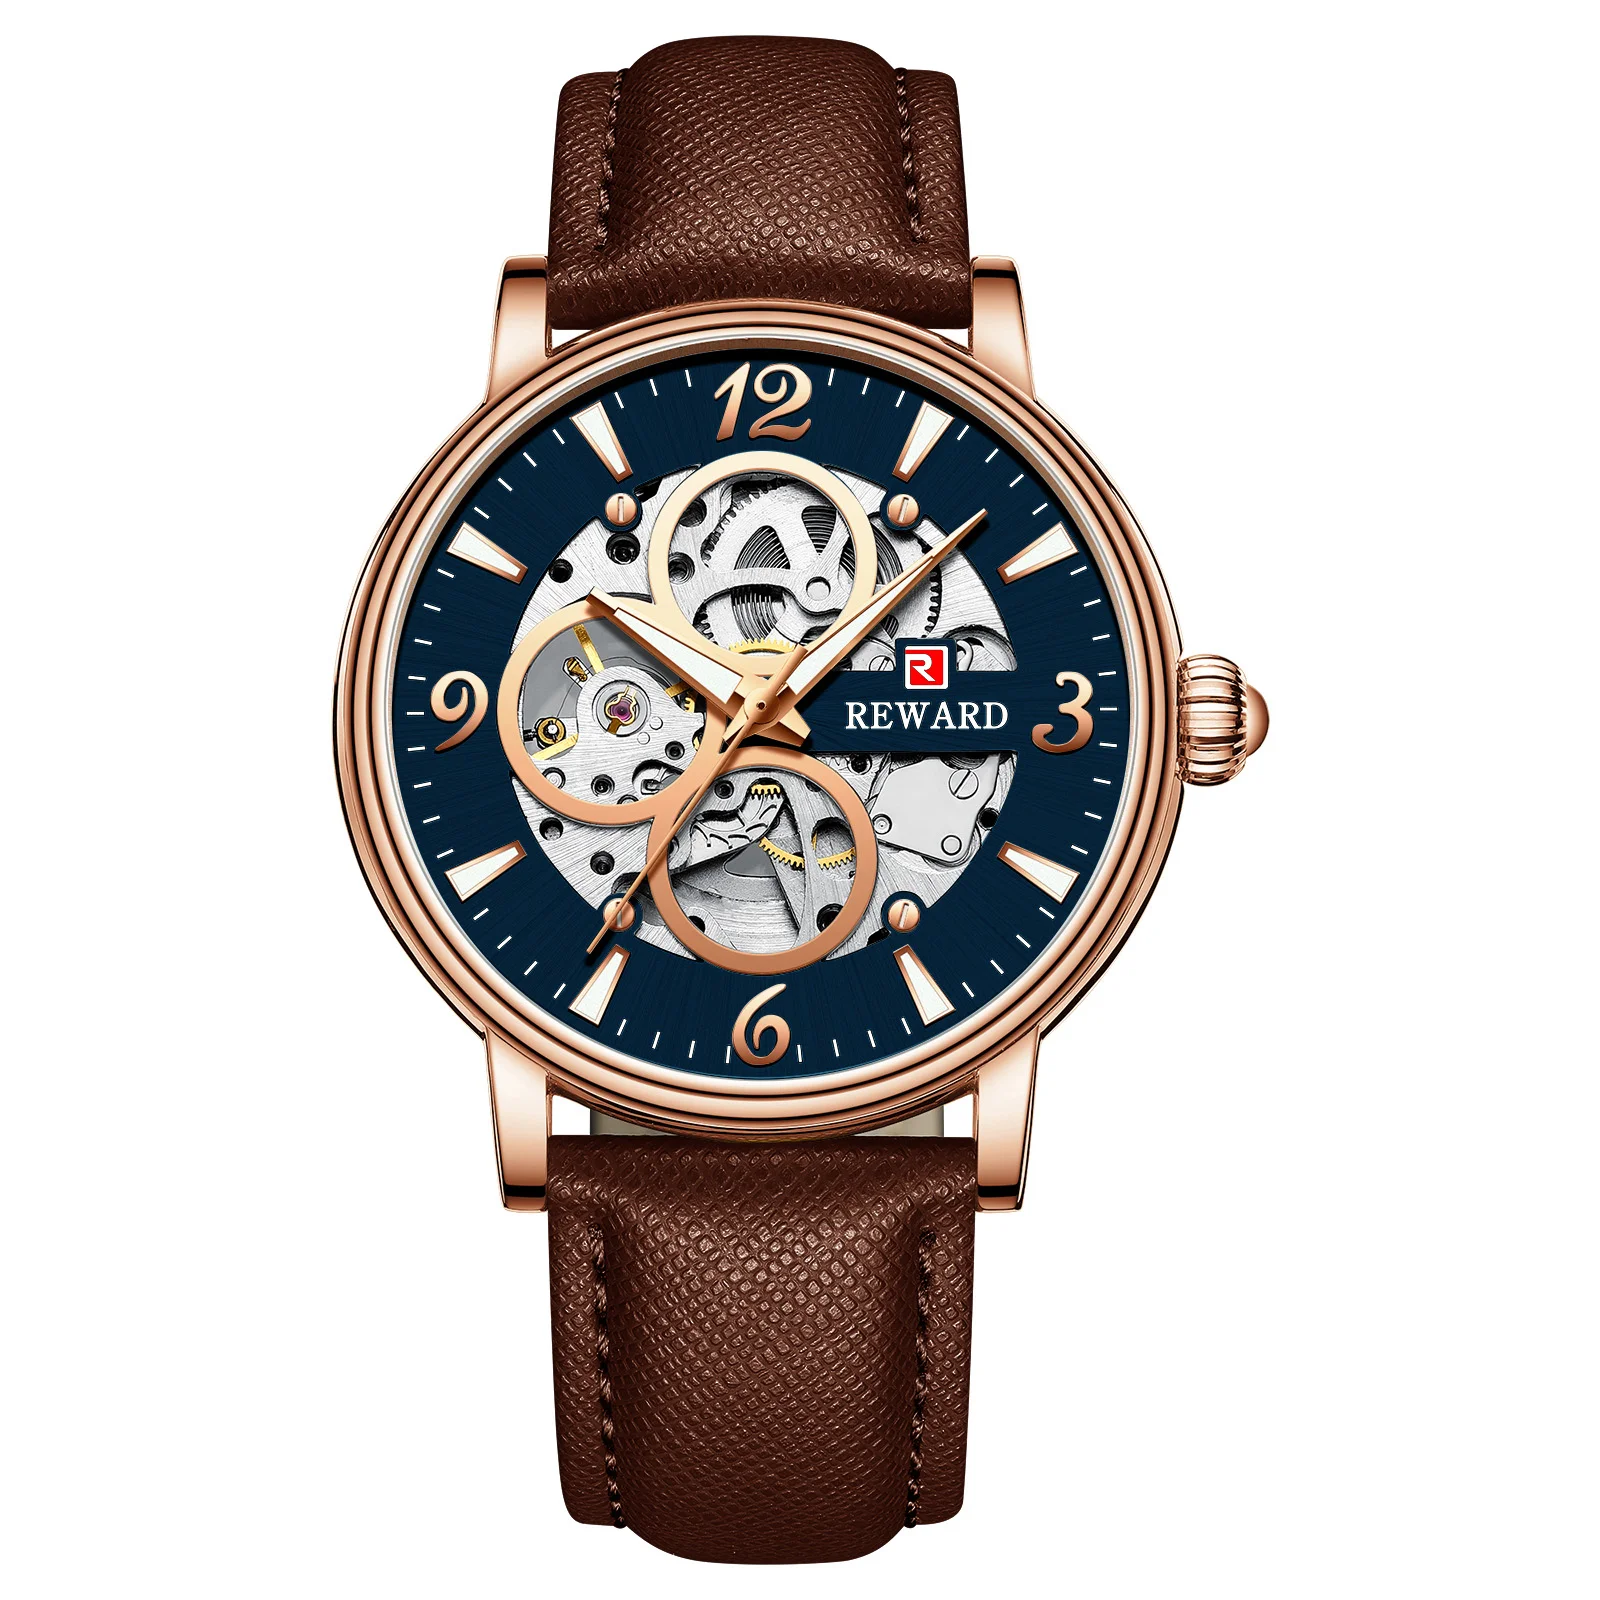 Reward Mechanical Watches Men Oem Luxury Skeleton Leather Band Mens Automatic Watch RD33001M